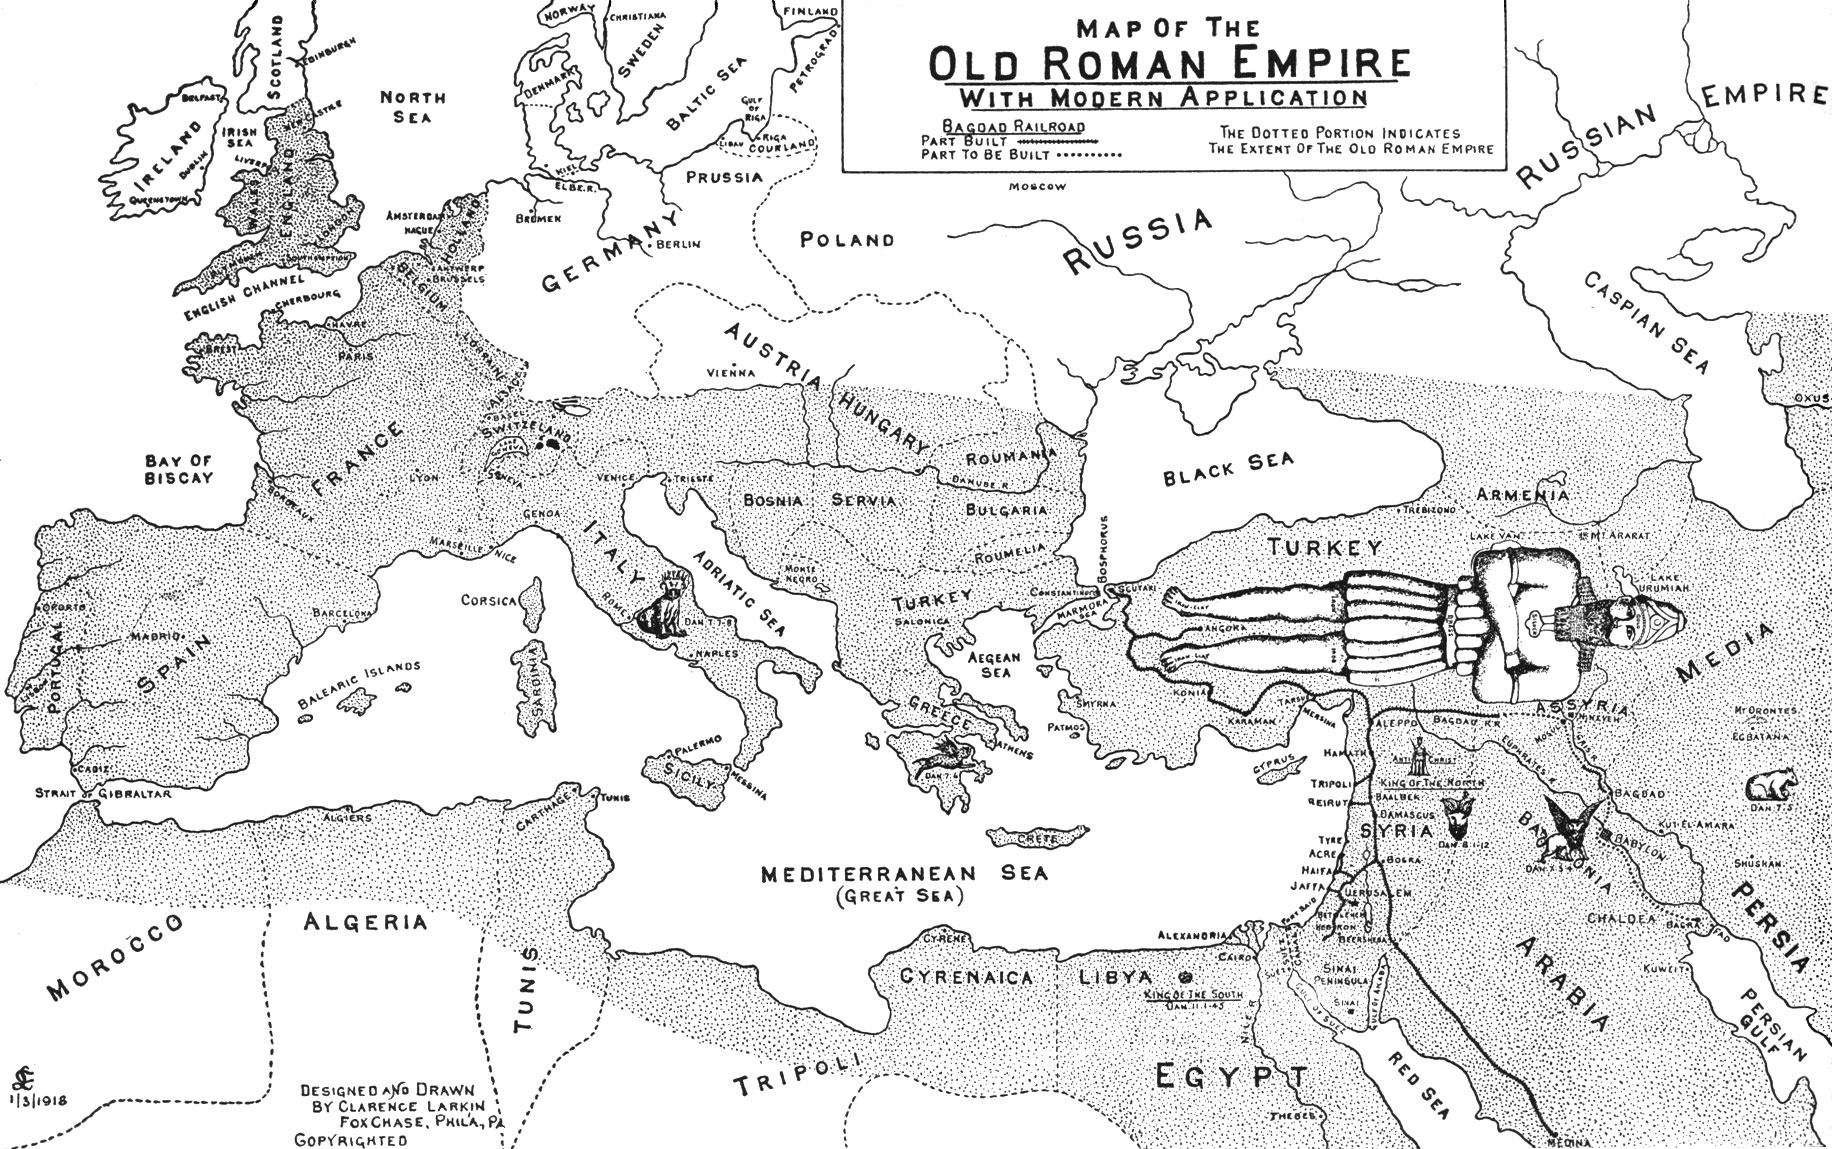 Map of the Old Roman Empire Illustration by Clarence Larkin